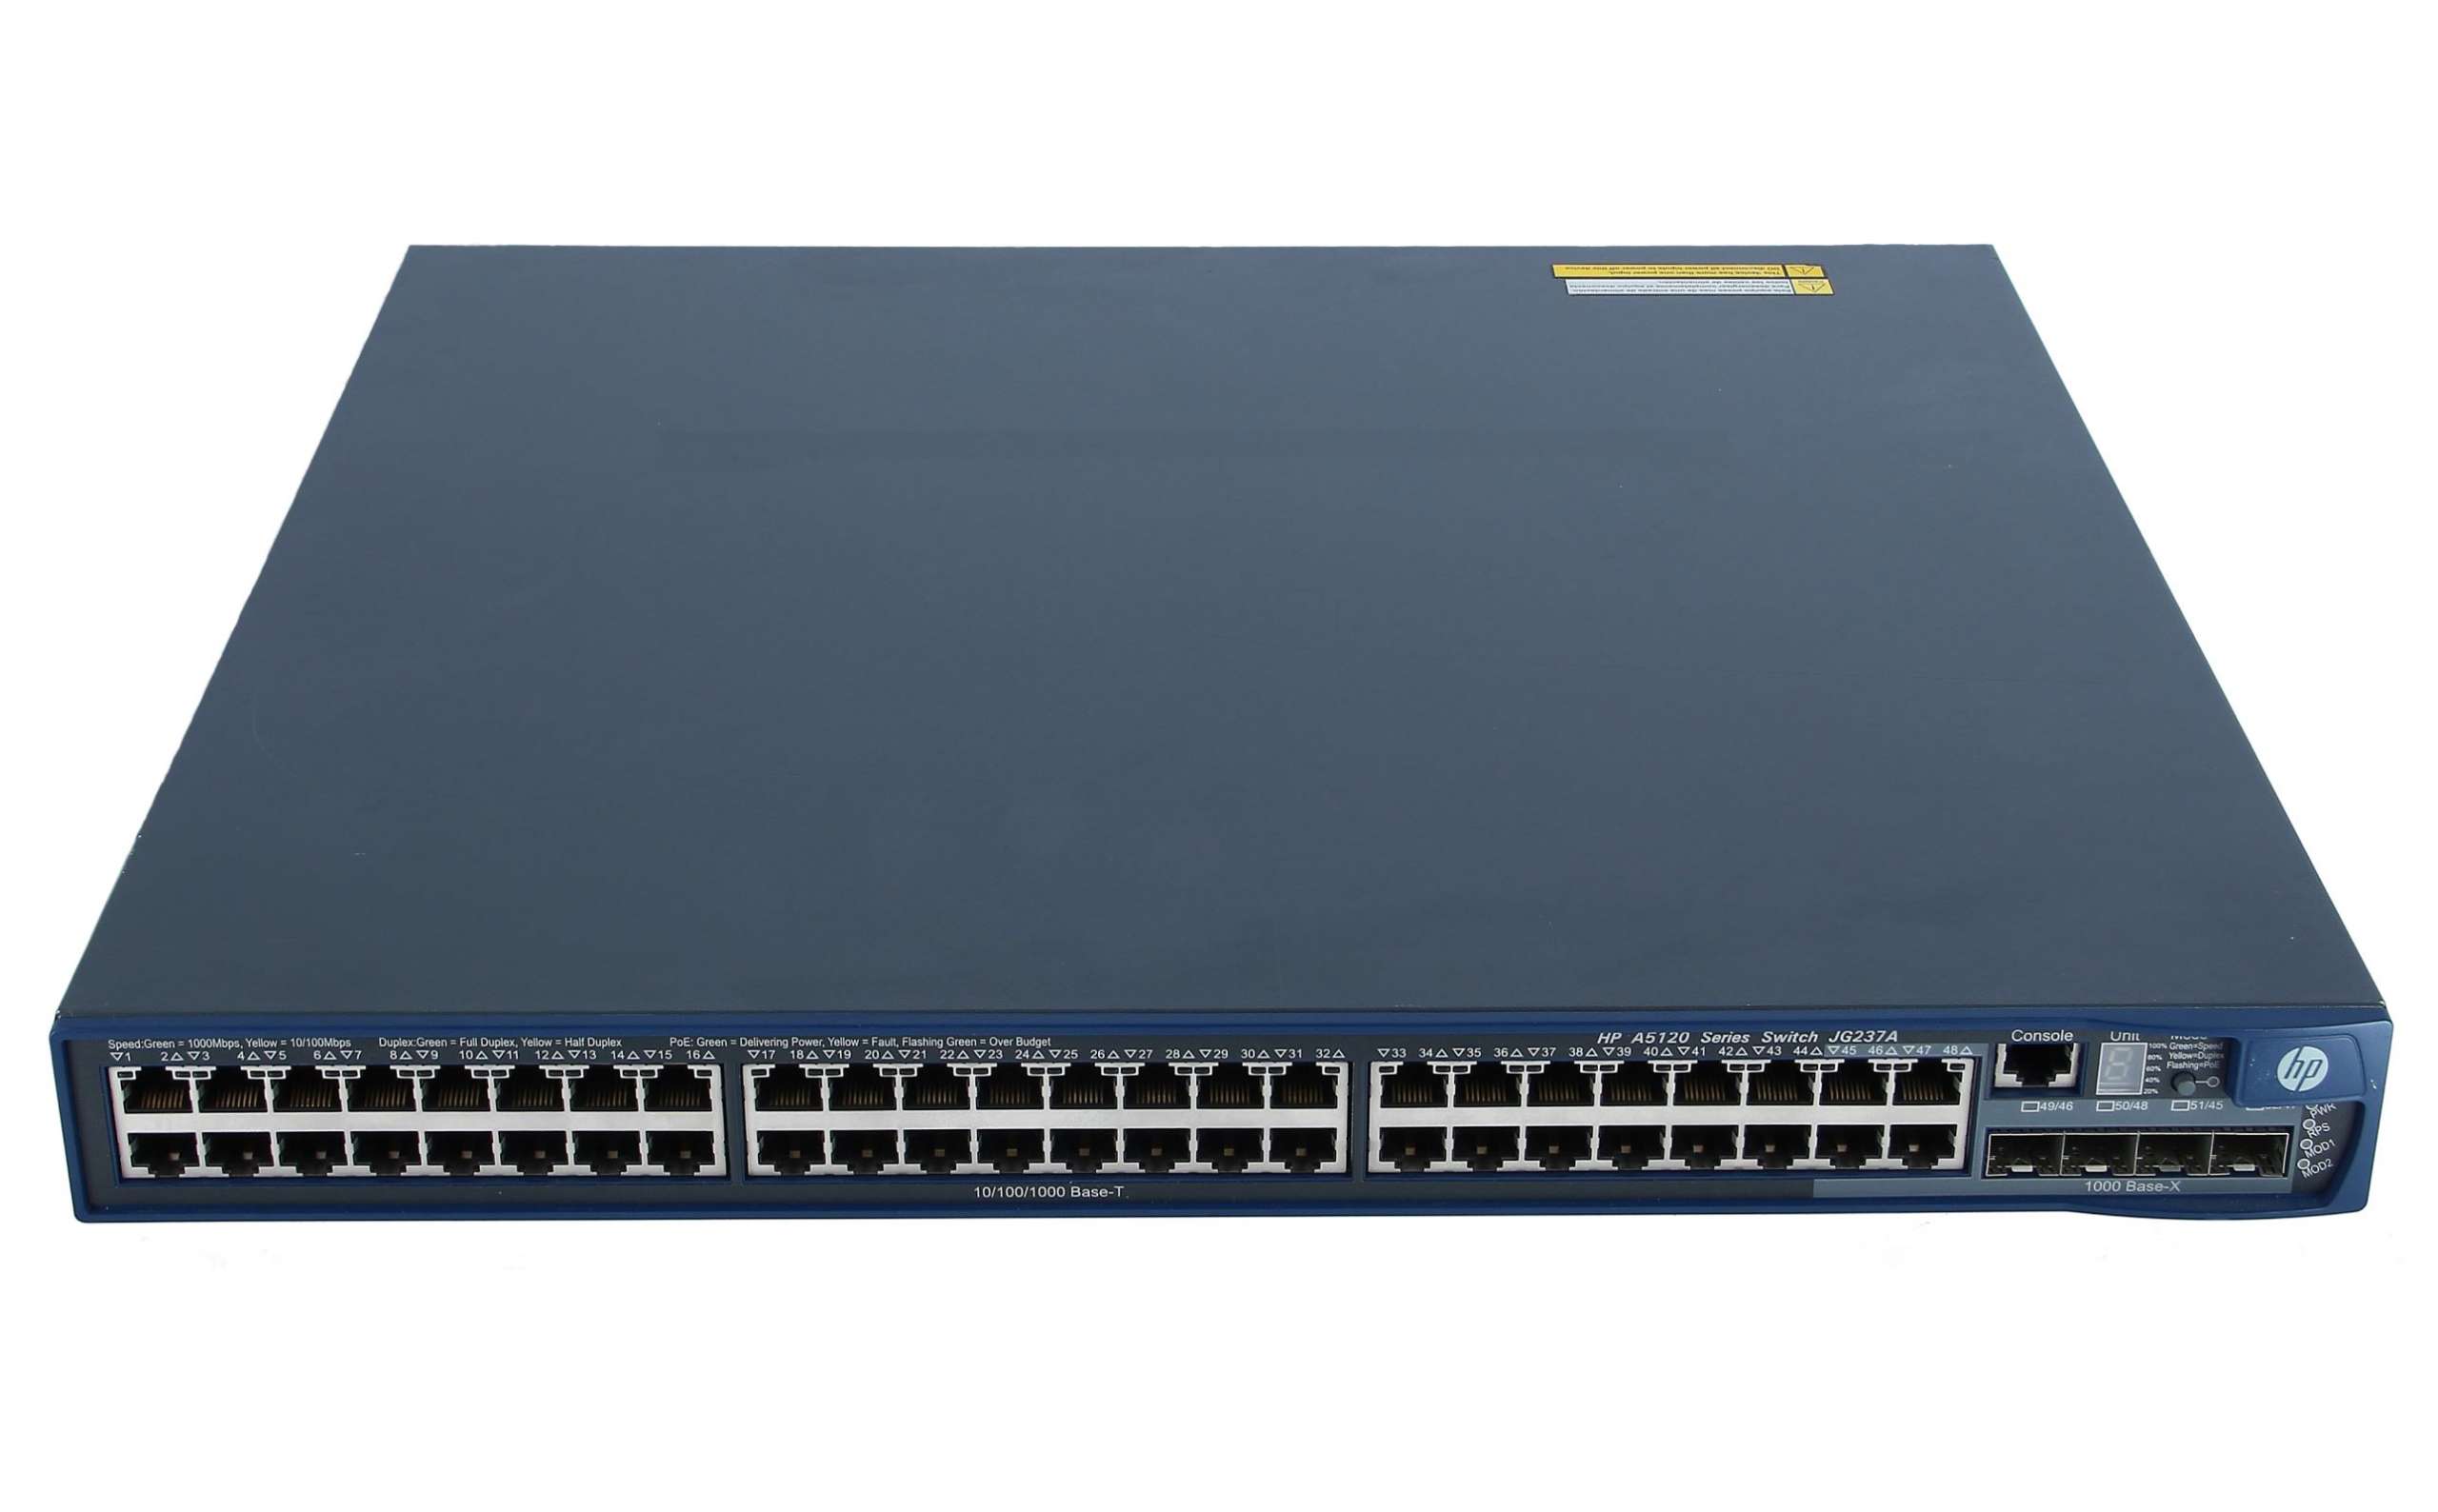 HP 5500-48G-PoE+-4SFP HI 10/100/1000 / 10Gbe Switch with 2 Slots JG542A